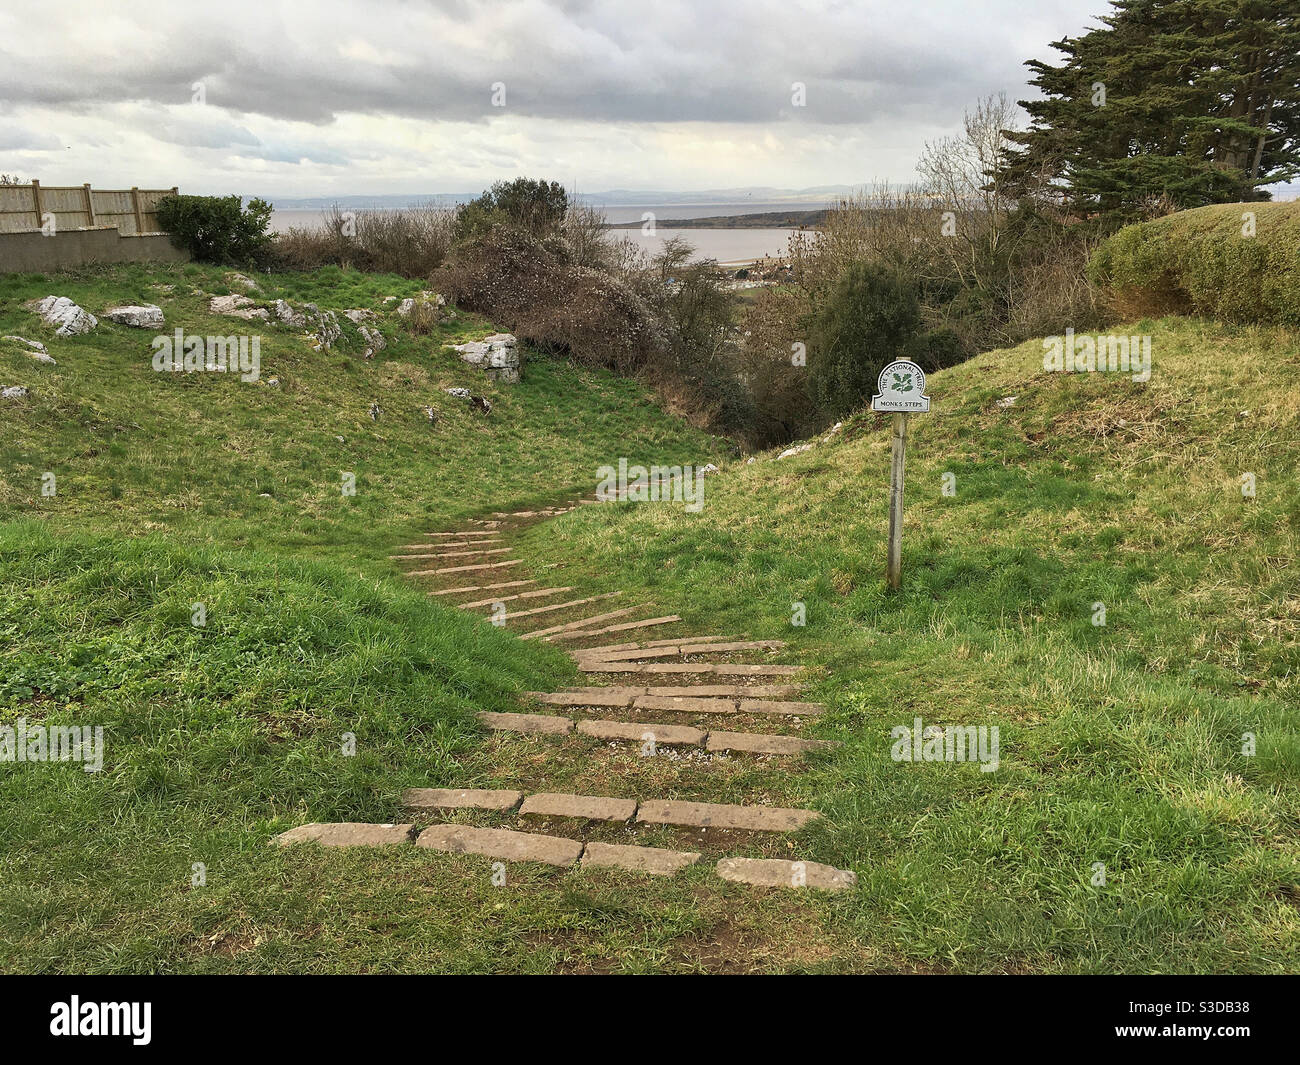 Monk’s Steps, an ancient pathway in Weston-super-Mare, UK photographed from the public highway Stock Photo